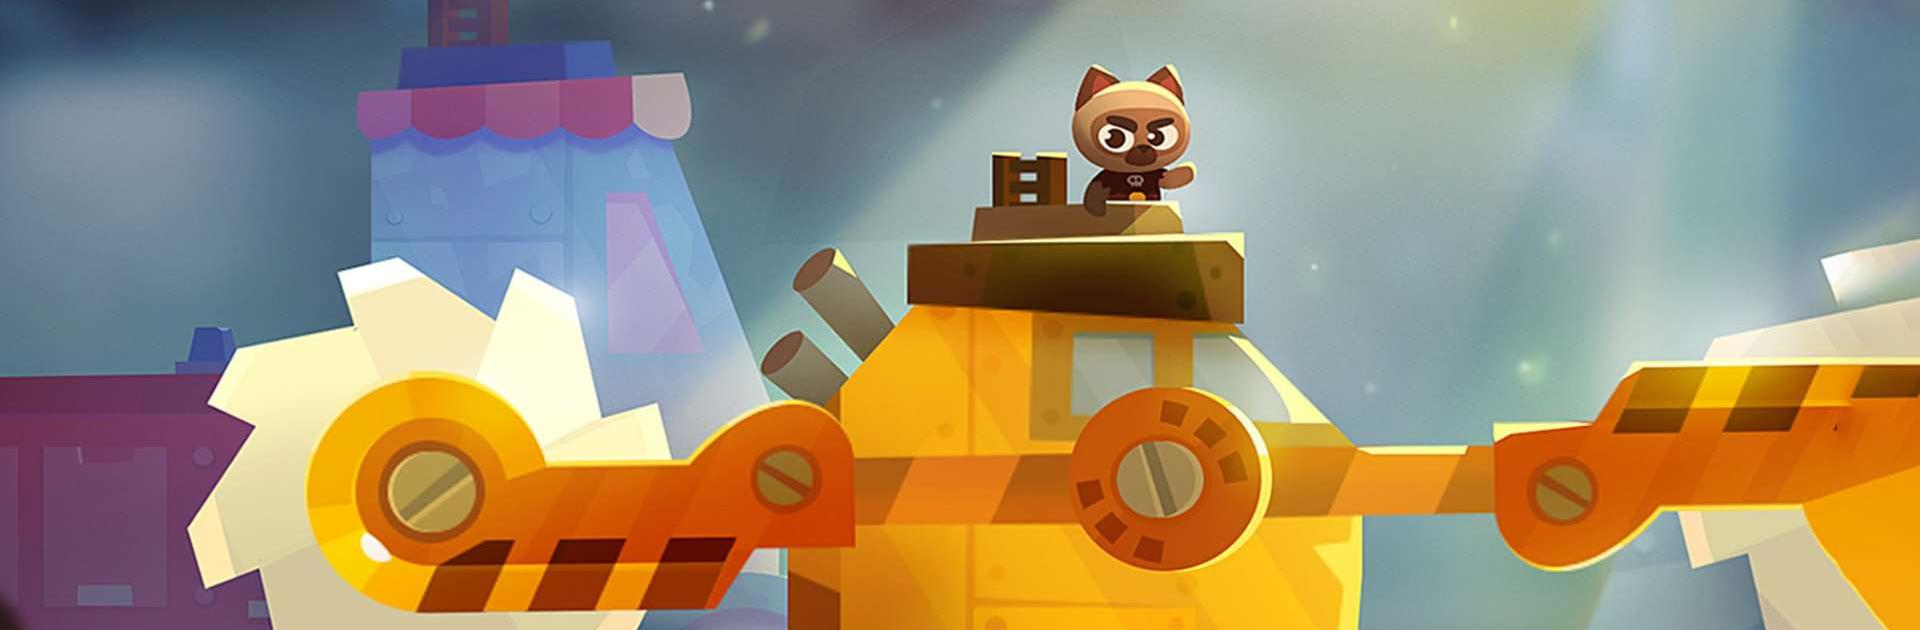 EvoWorld.io APK (Android Game) - Free Download